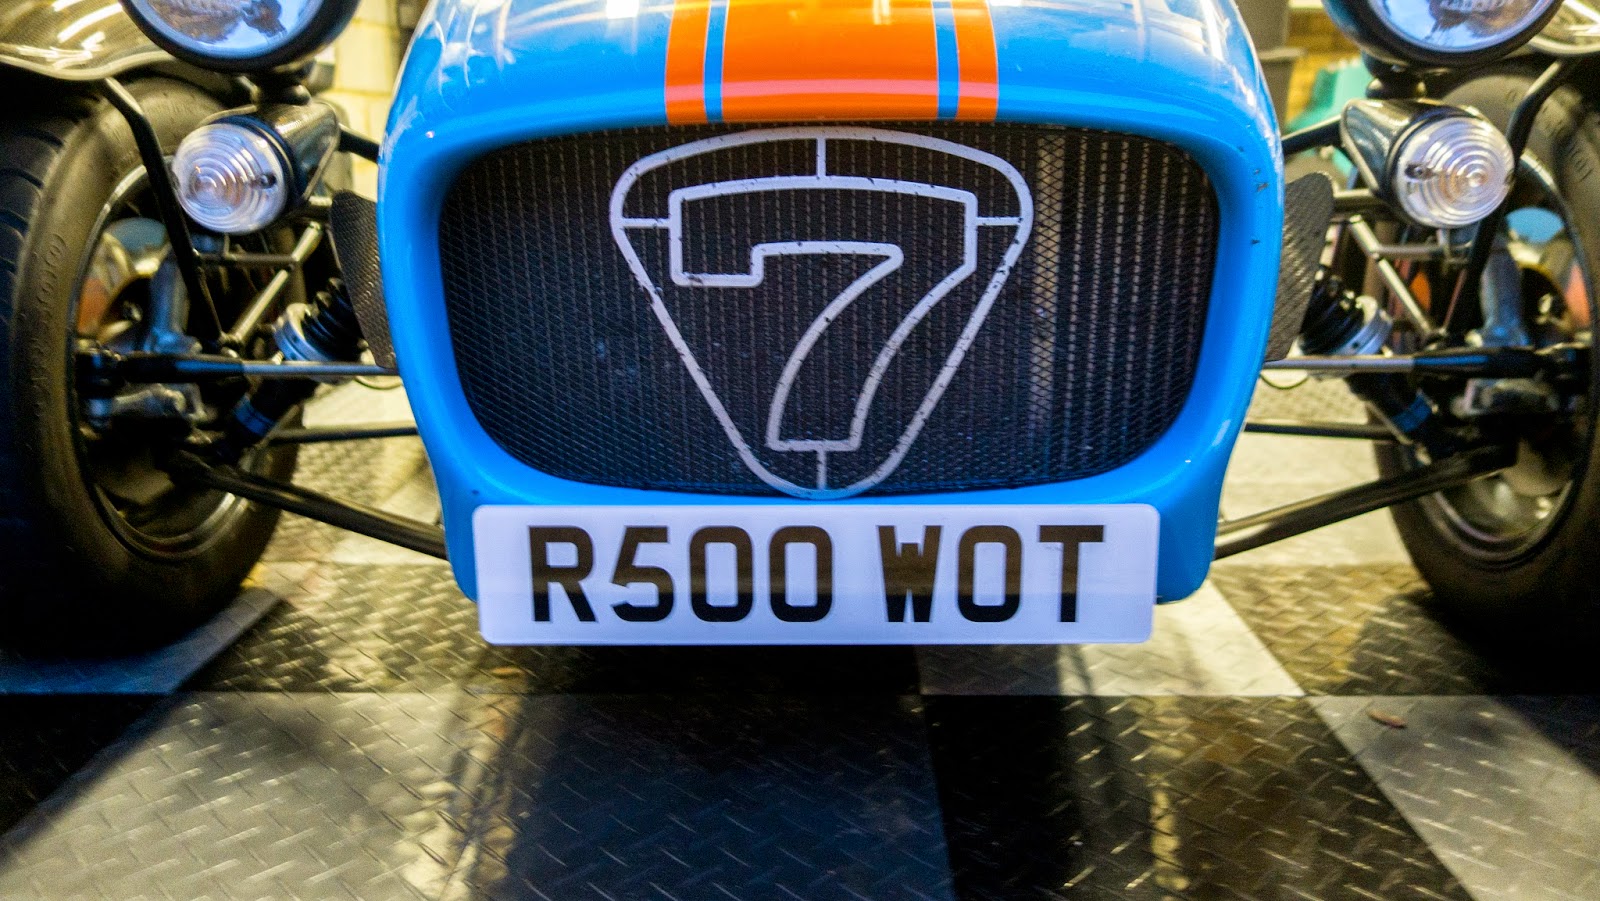 R500 WOT 'show' number plate